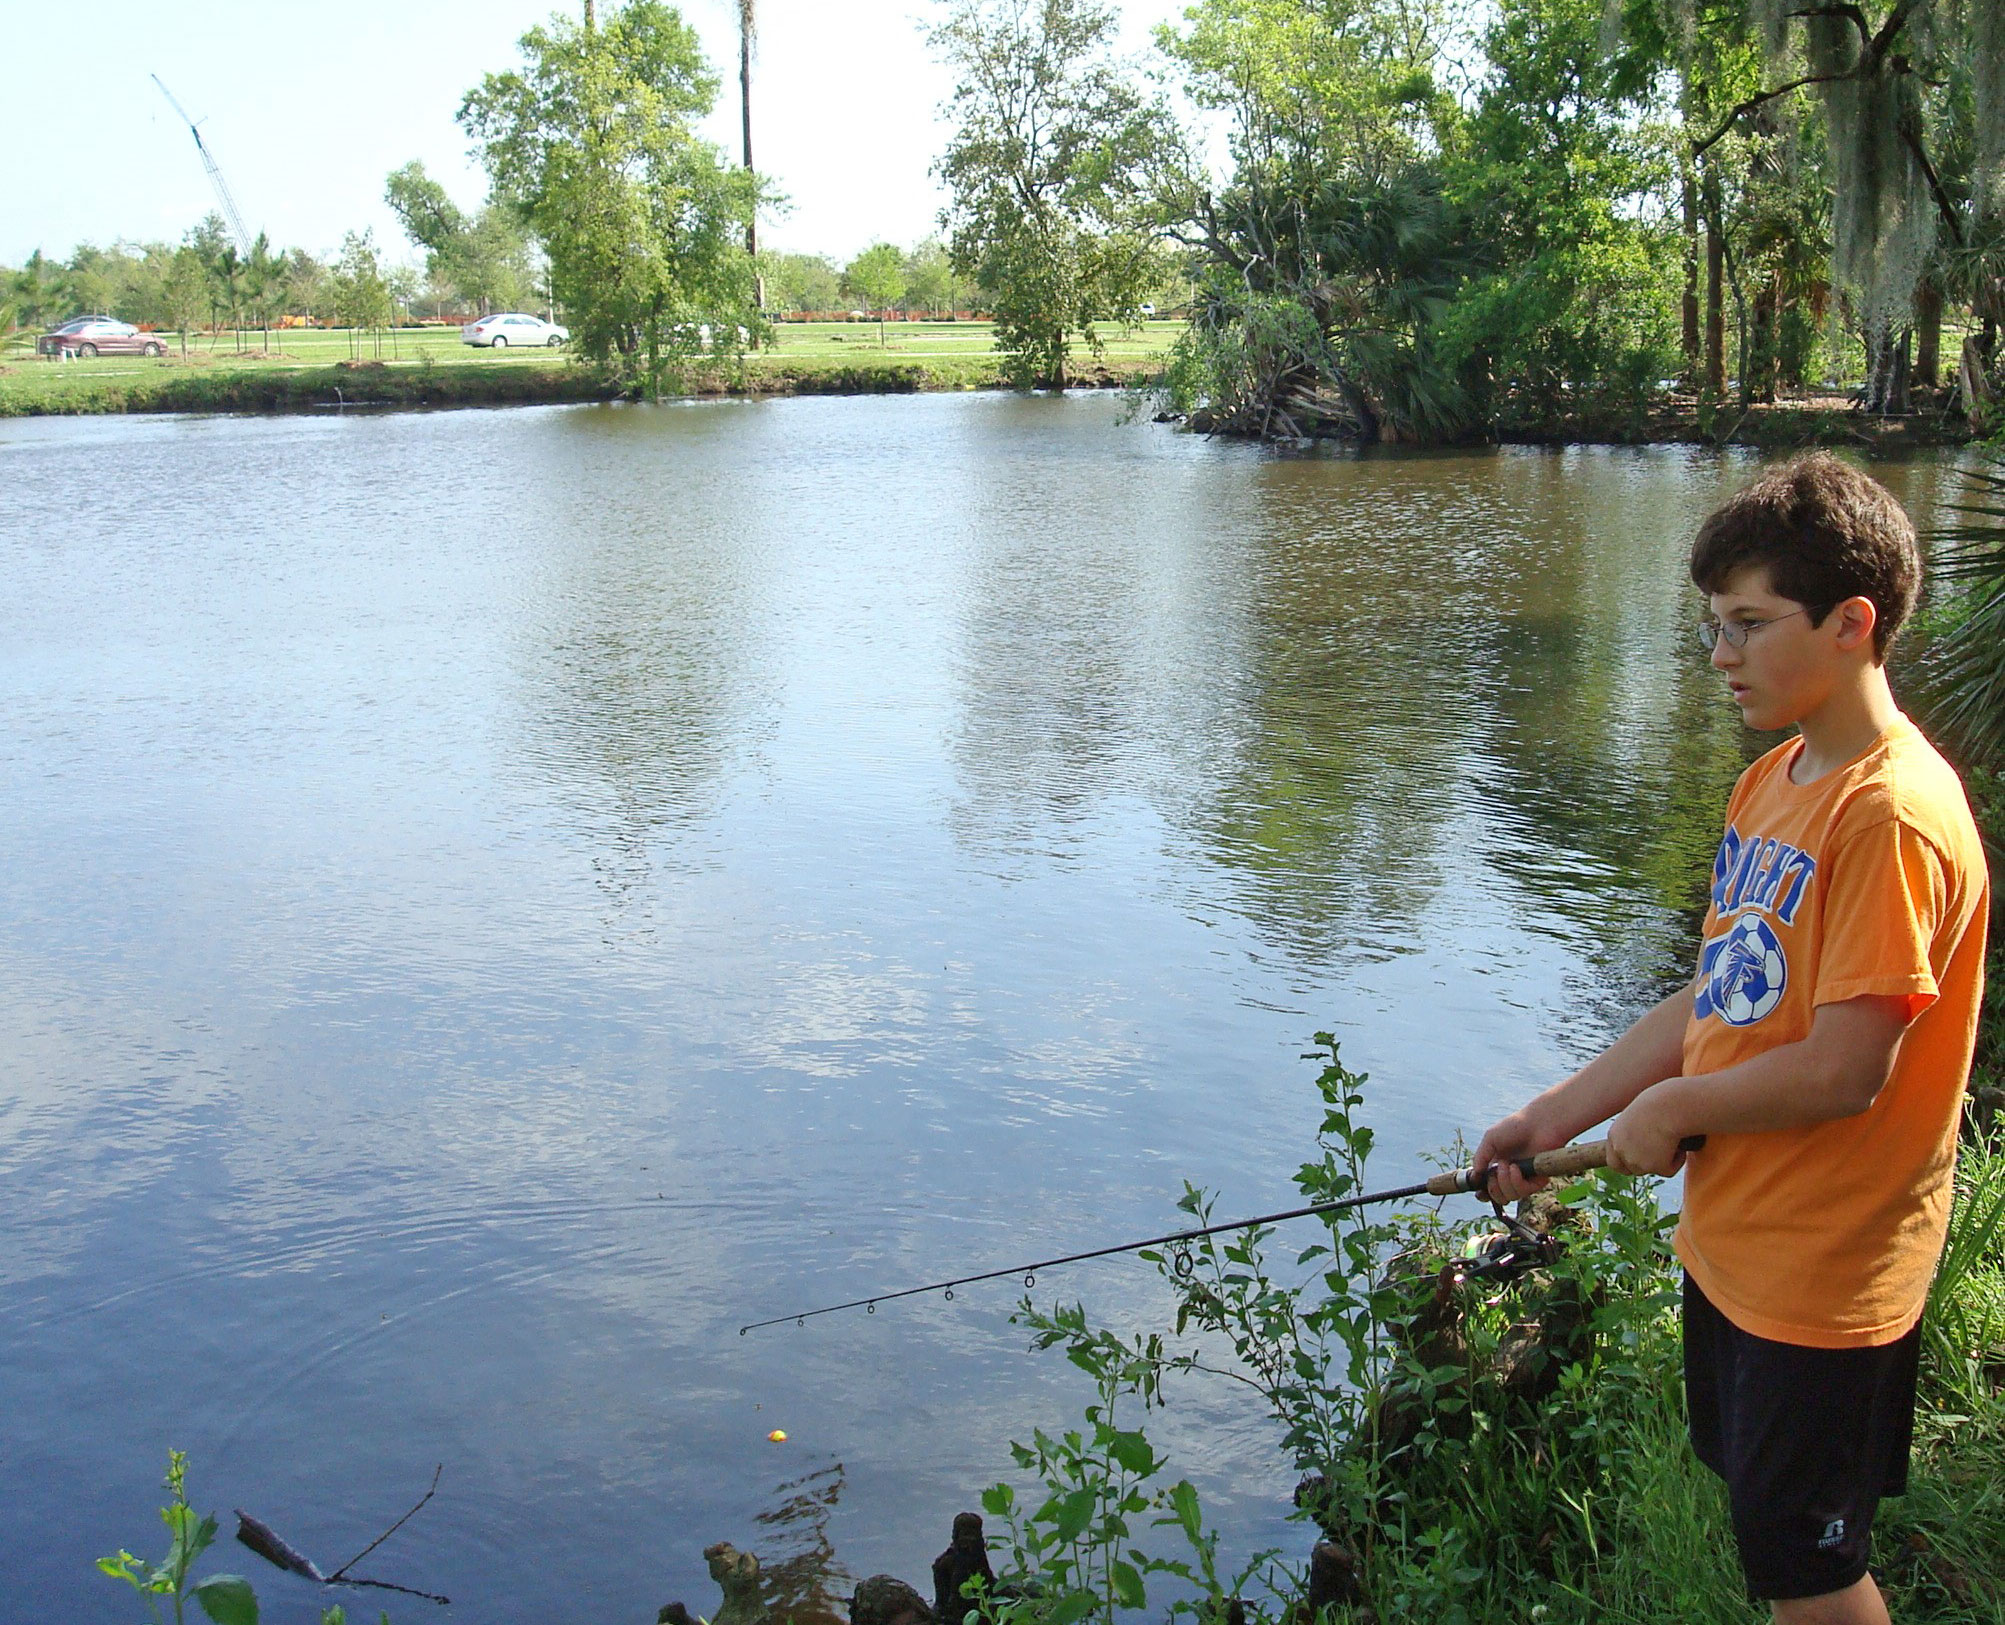 The City Park fishing rodeo is a bank-fishing only event, which makes it perfect for young anglers.